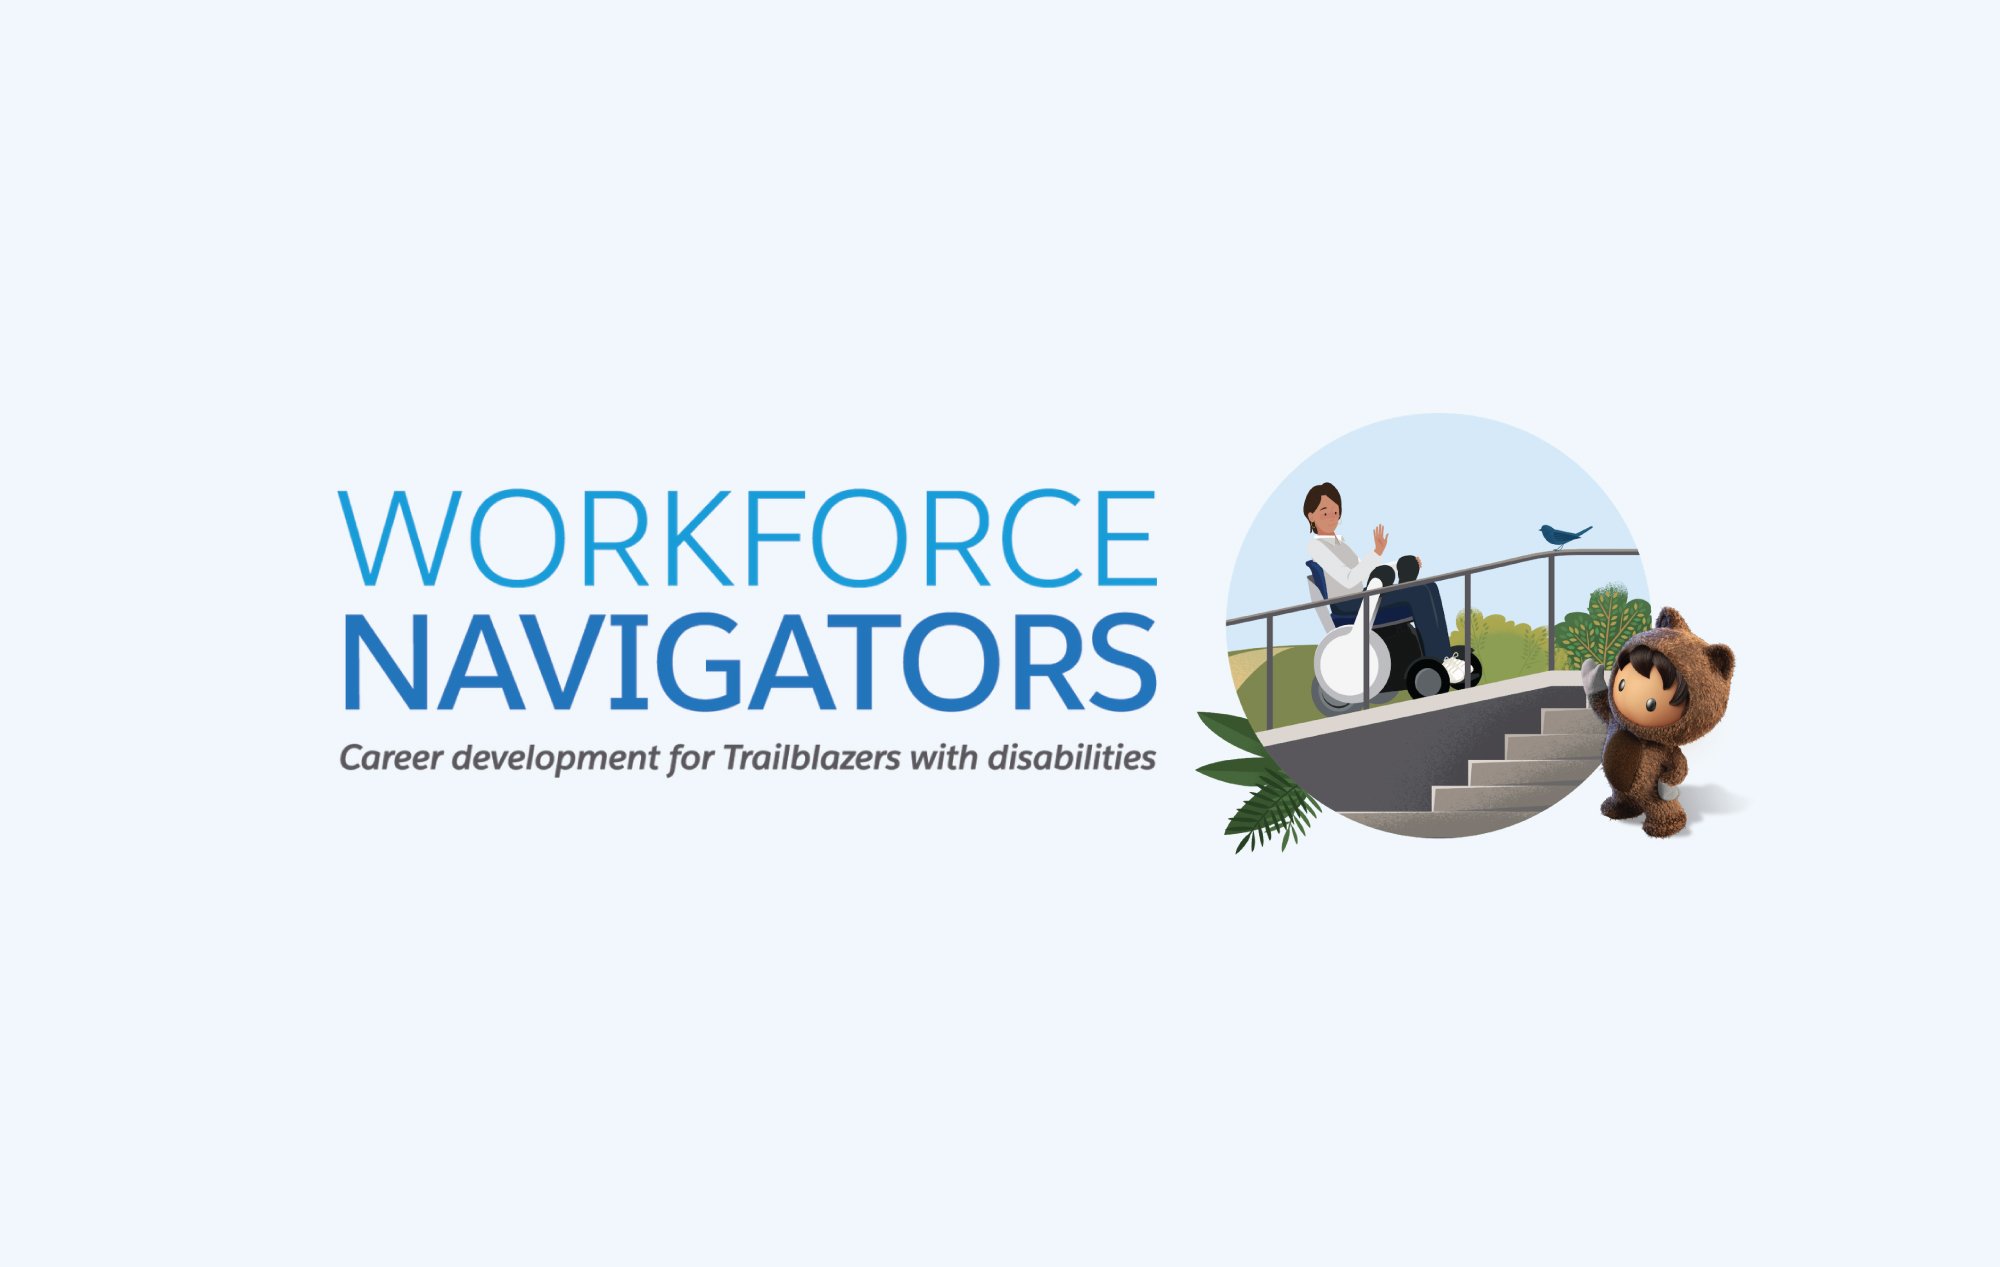 Workforce Navigators text with Salesforce character graphics on the right.